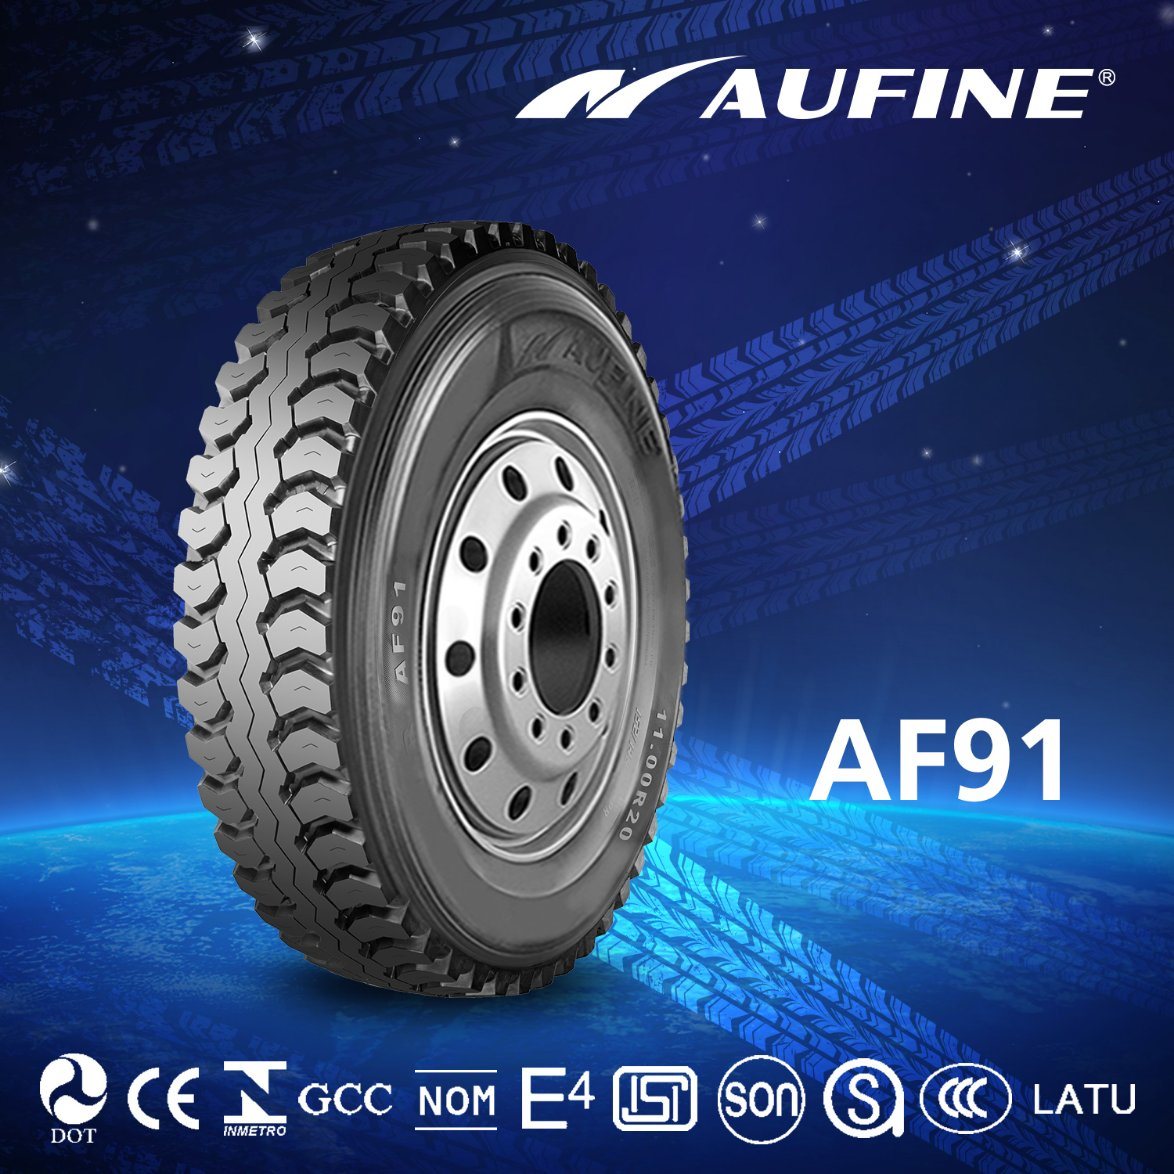 TBR Tyres for 315/80r22.5 385/65r22.5 with E-MARK